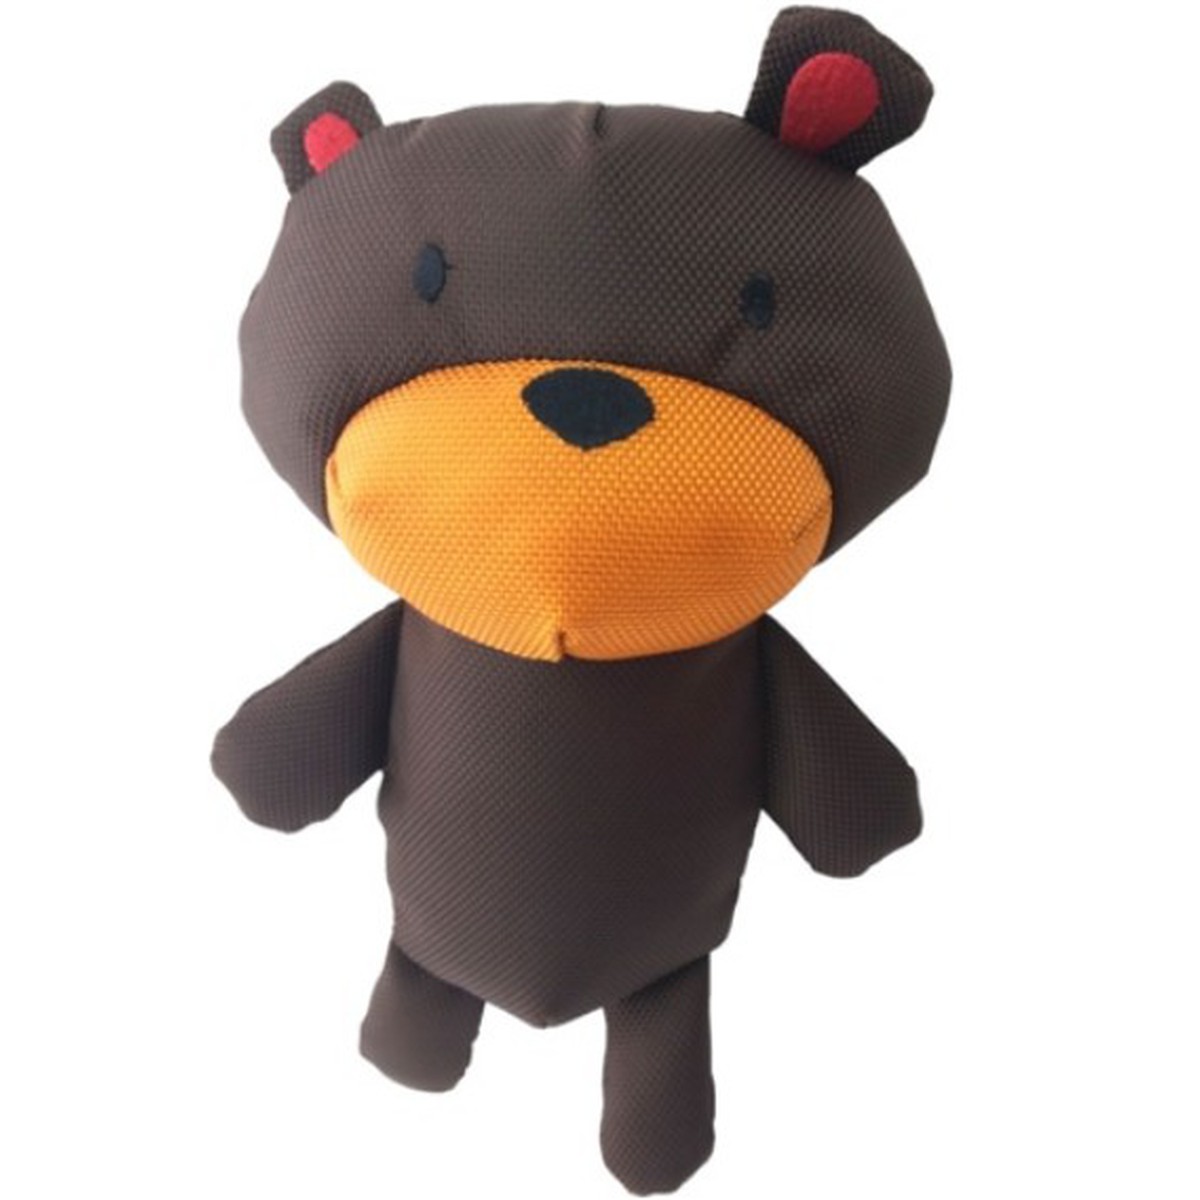   Beco Soft Toy - Teddy - Small  Small